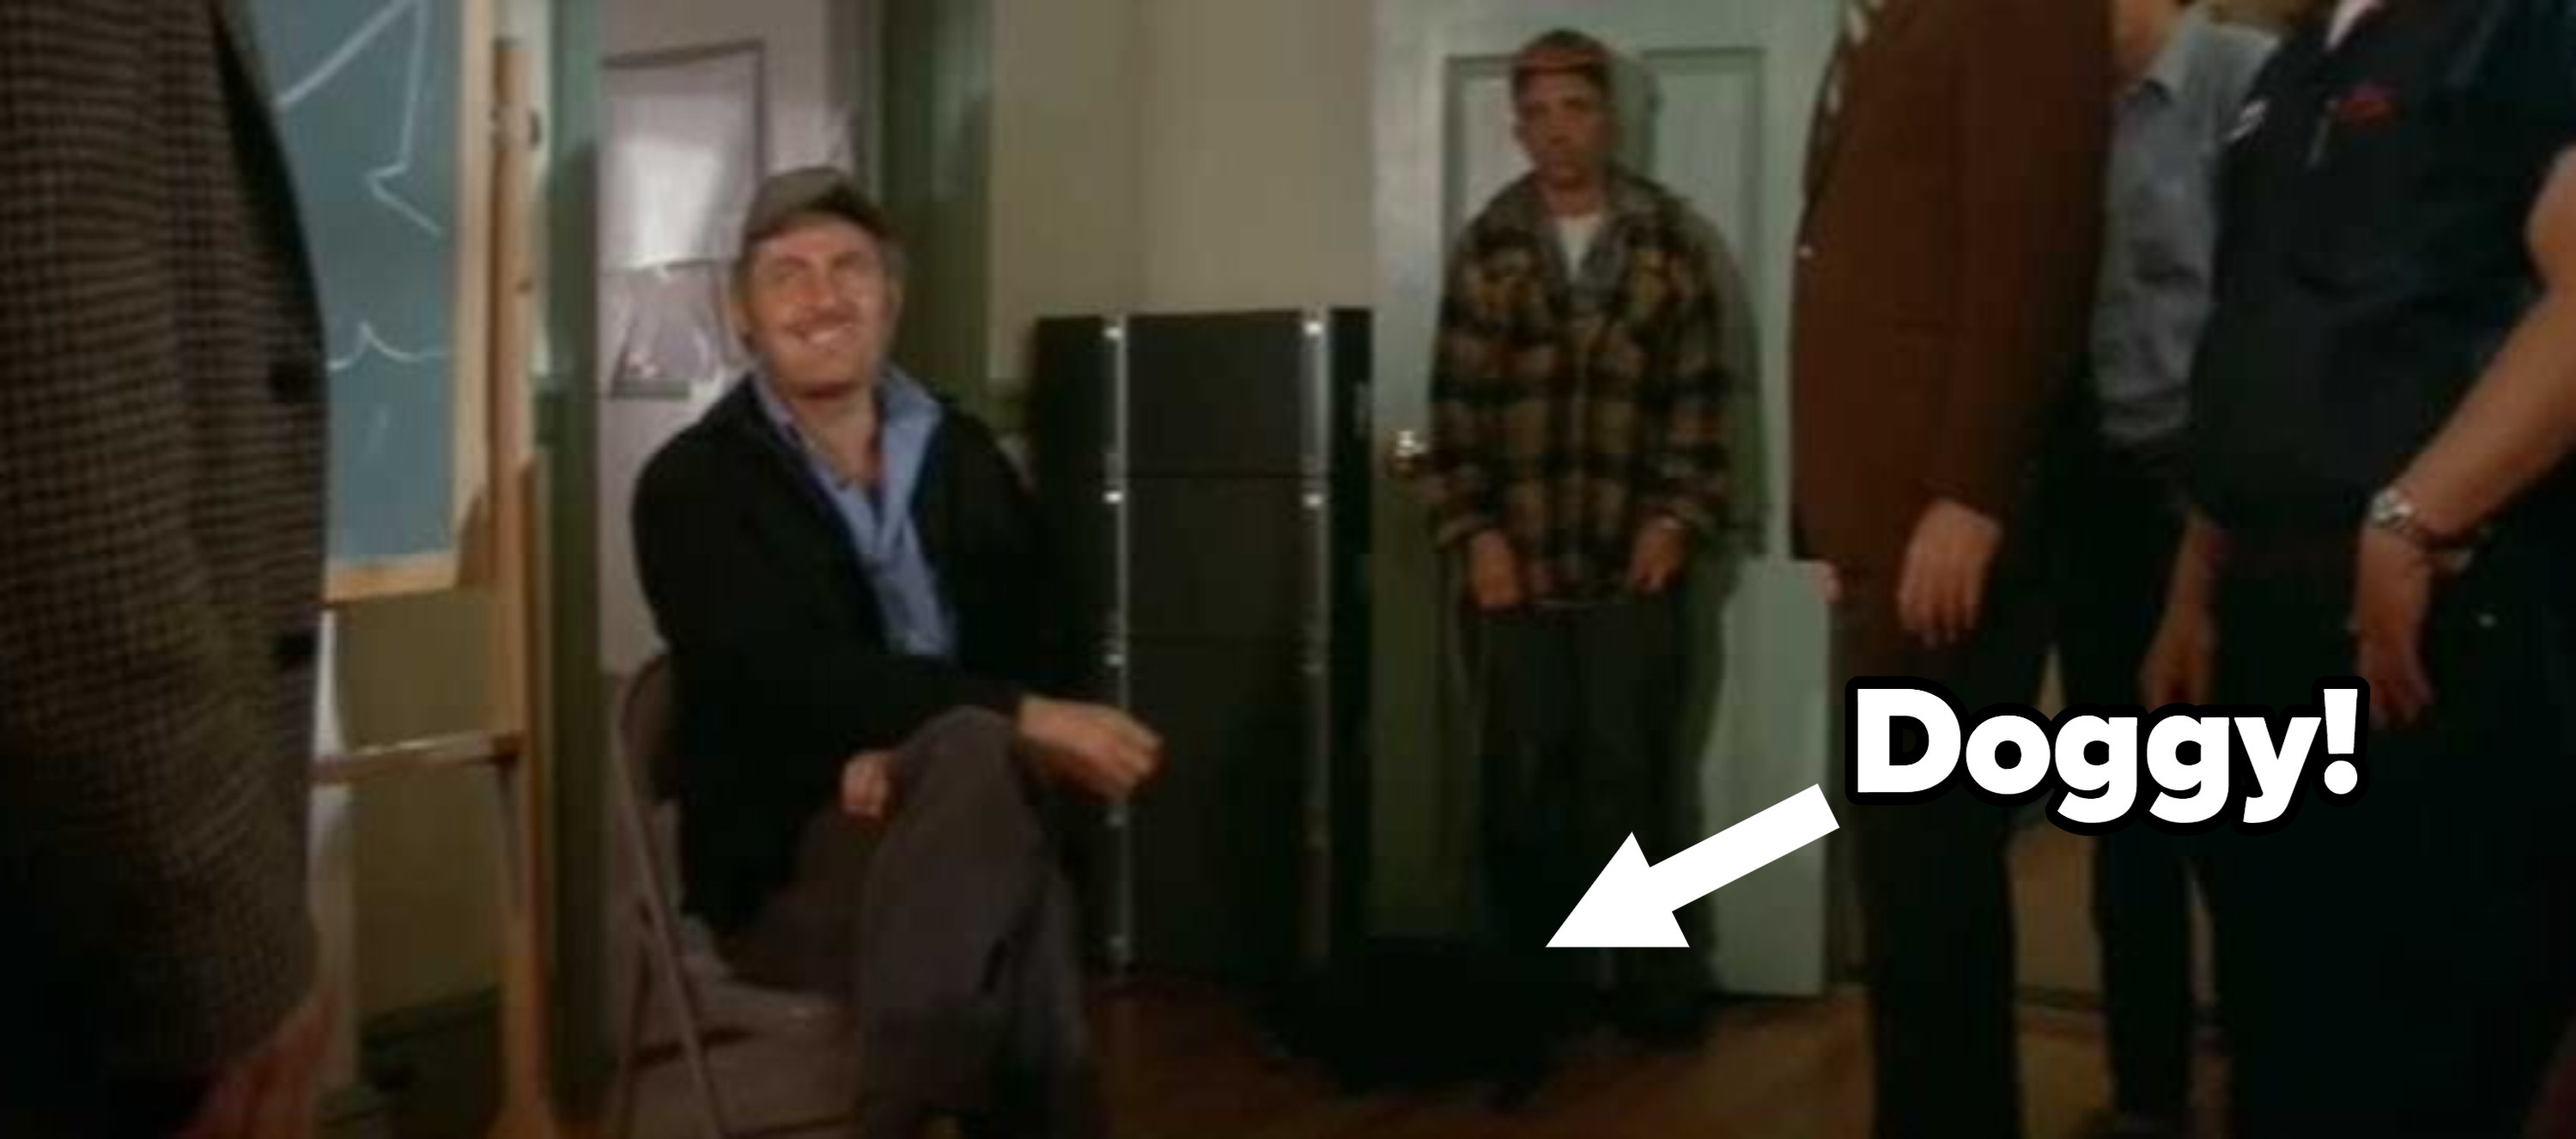 Dog sitting behind Quint in &quot;Jaws&quot;